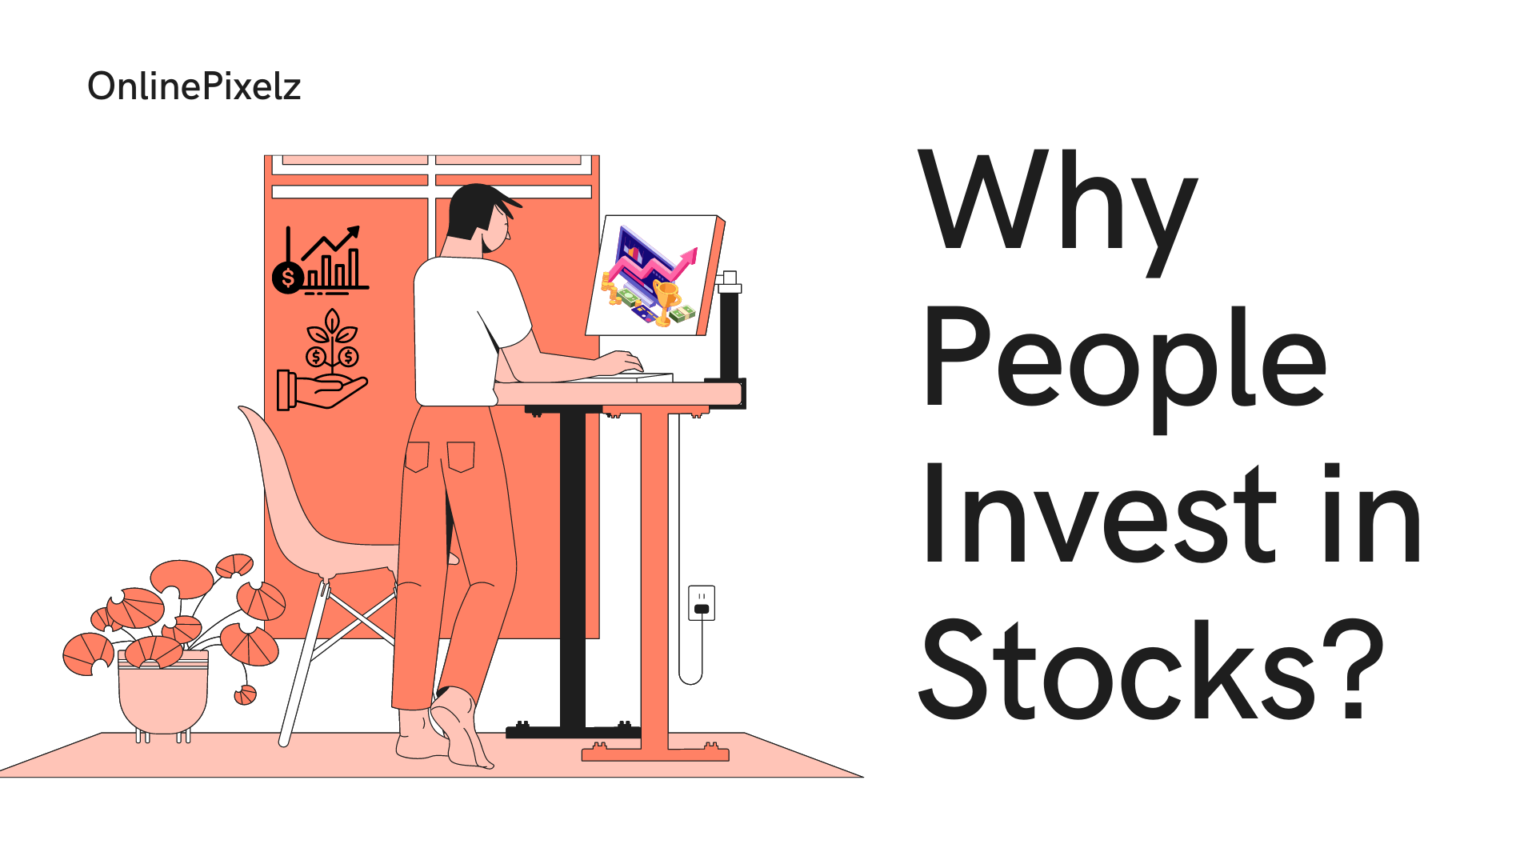 Why People Invest in Stocks